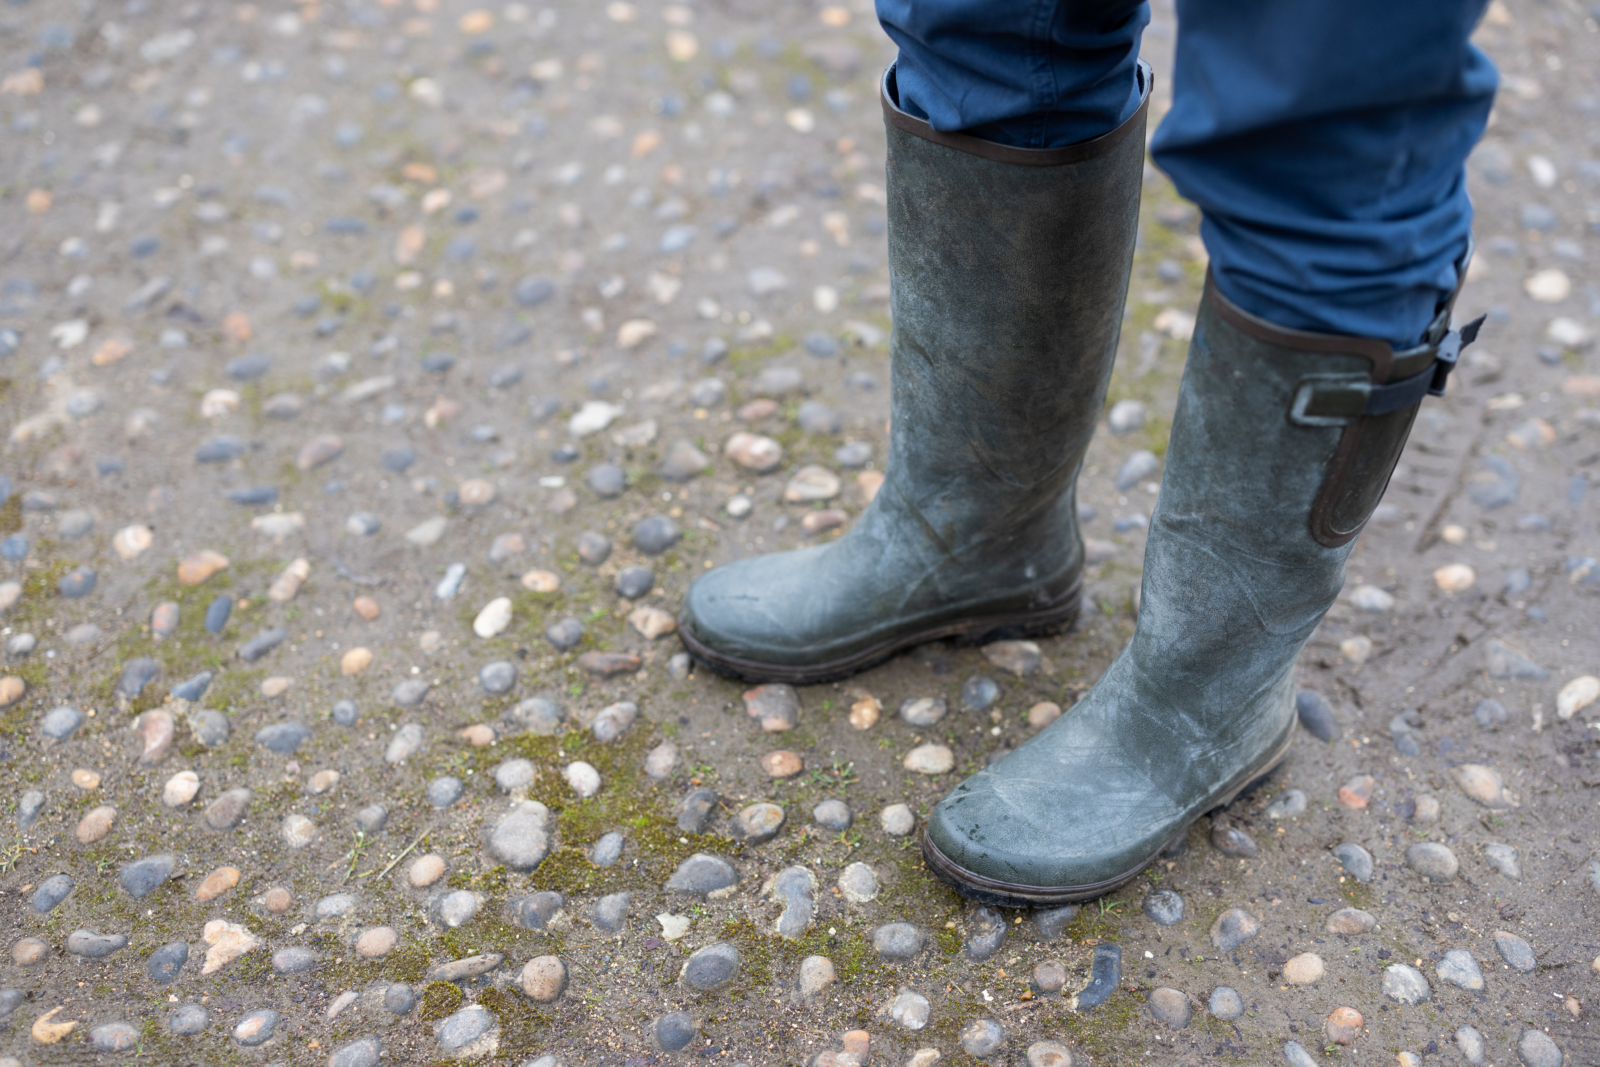 image shows a person standing with green wellingtons, you cannot see their head, the photo is of their feet only. The person is standing on grey and white cobble stones. Some are covered in green moss